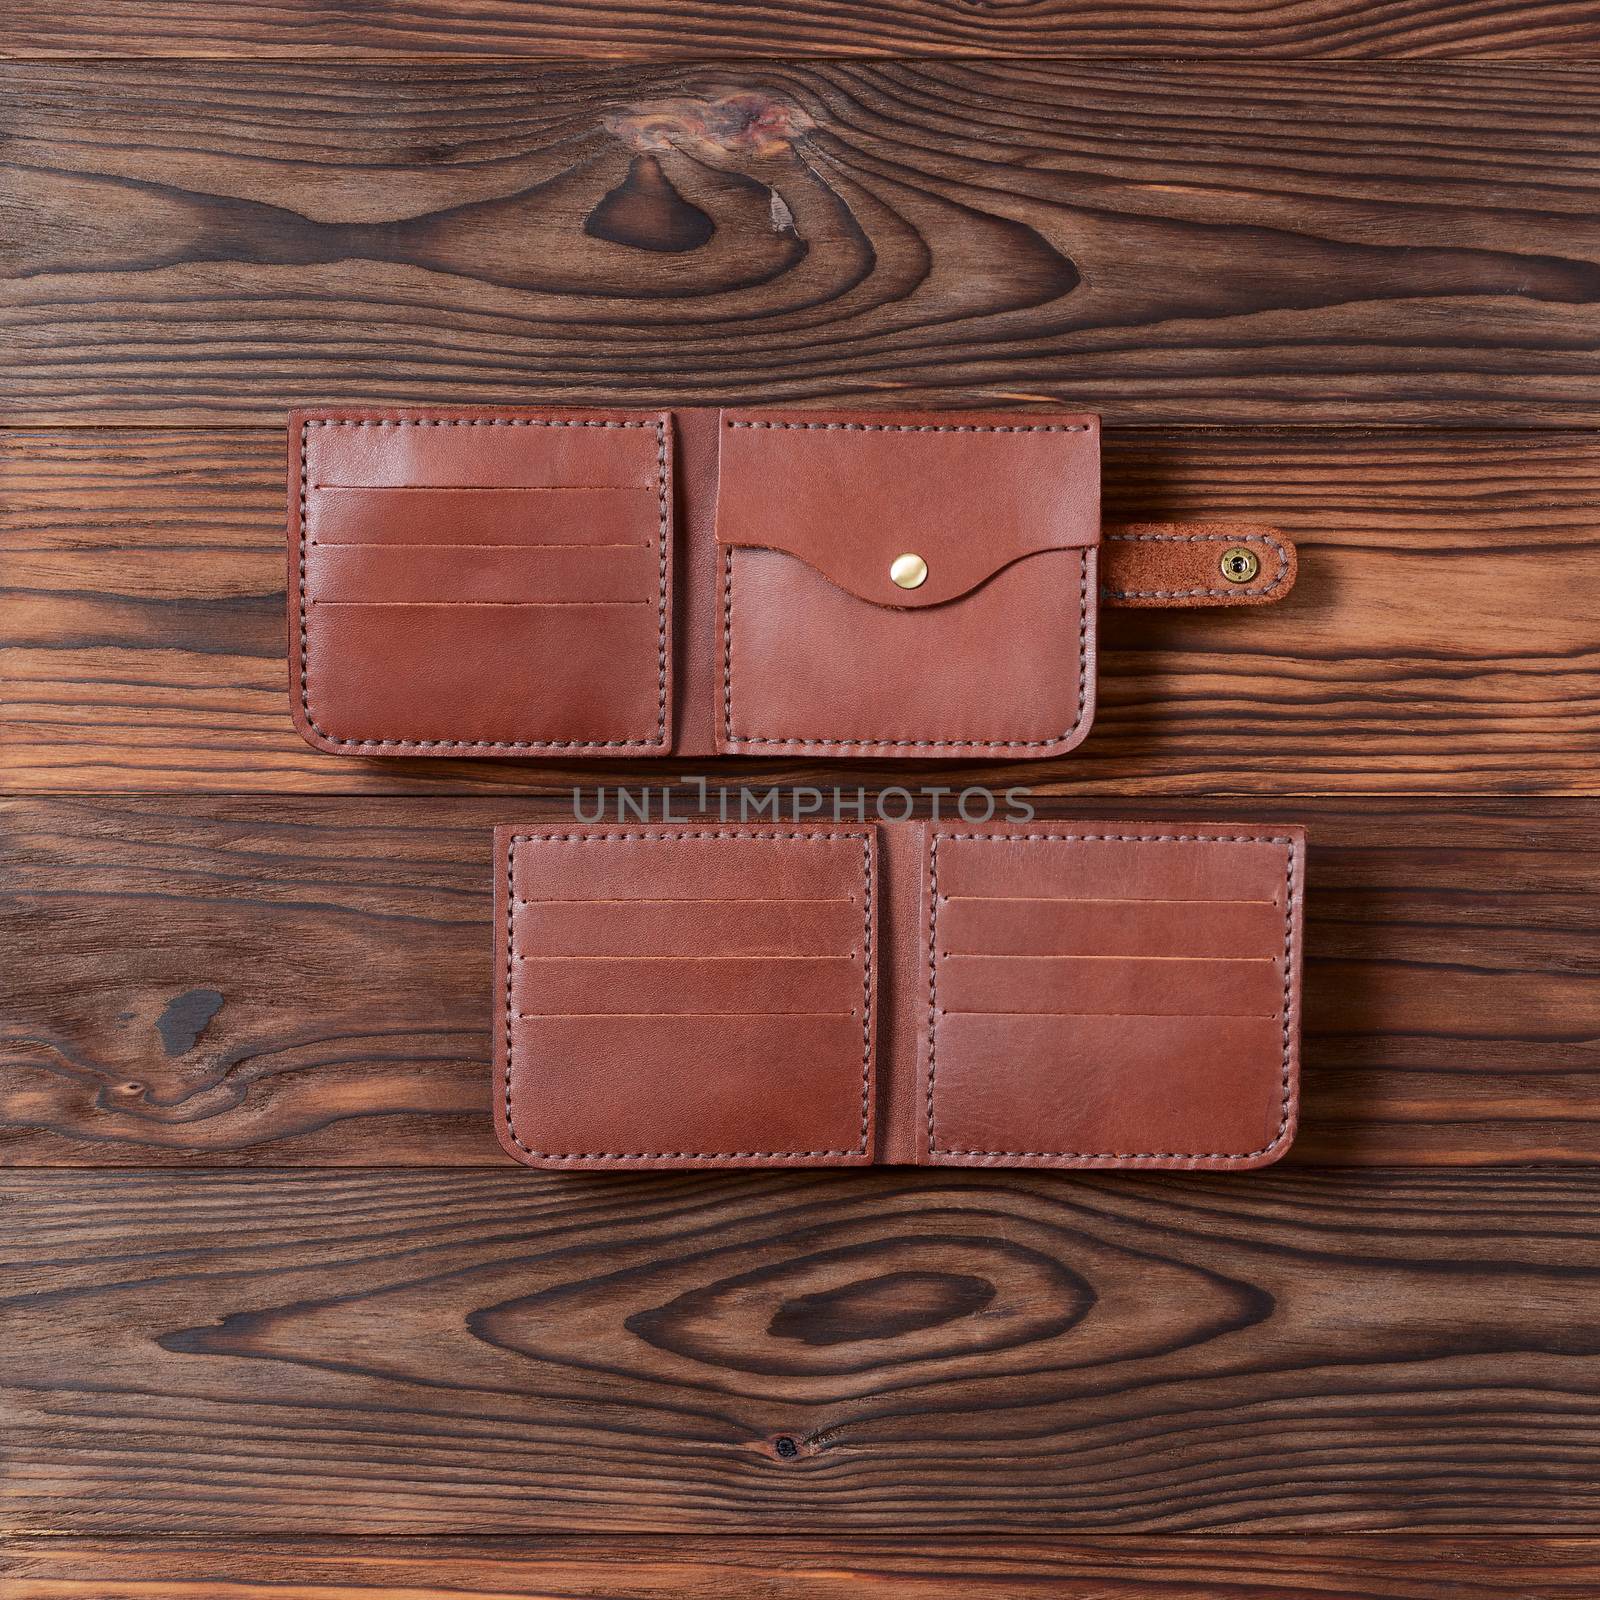 Two red color handmade leather wallets on wooden textured background. Up to down view. Wallet stock photo. by alexsdriver